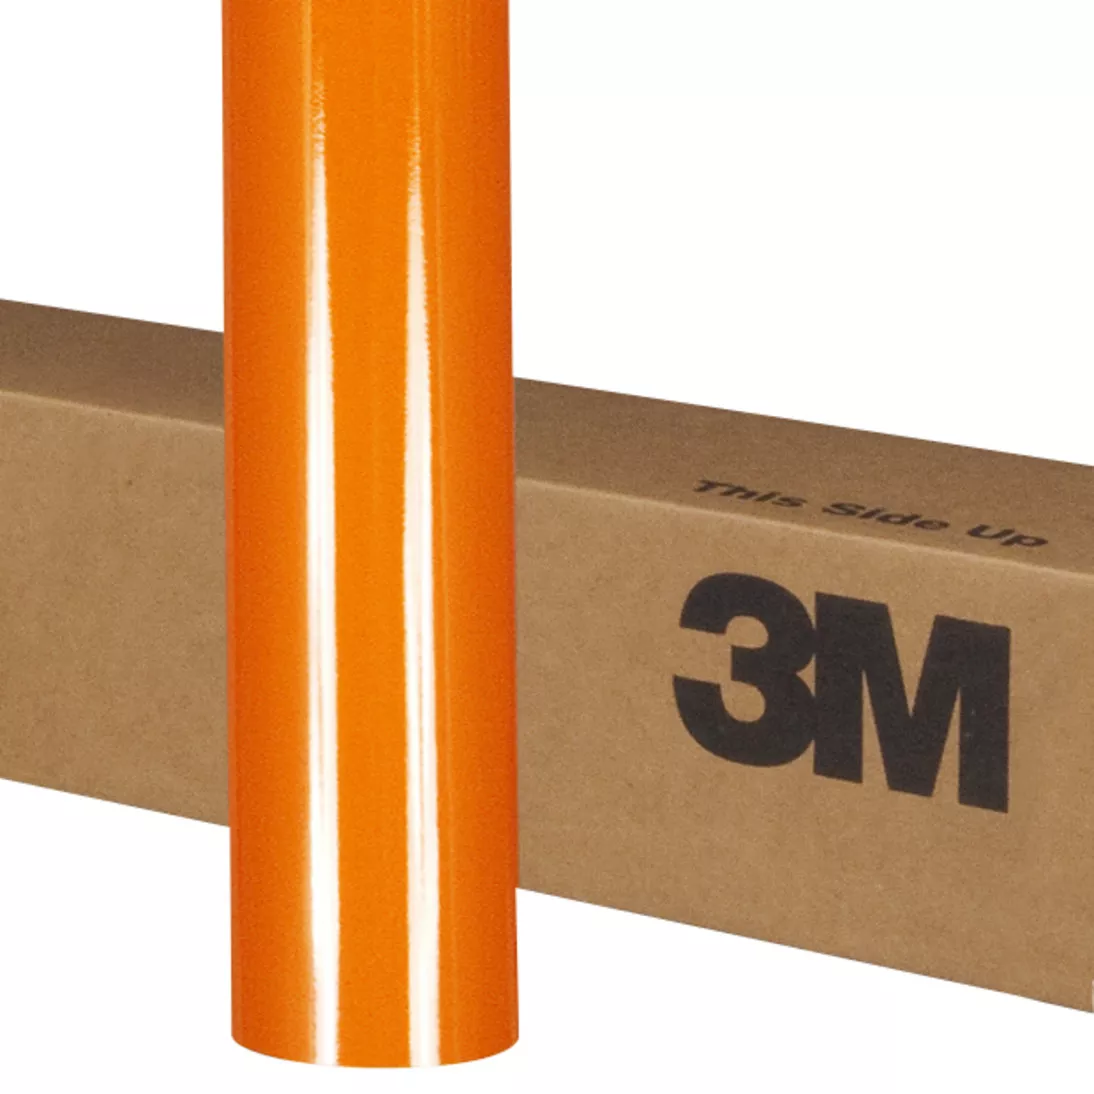 3M™ Scotchlite™ Removable Reflective Graphic Film With Comply™ Adhesive
680CR-14, Orange, 48 in x 50 yd, 1 Roll/Case